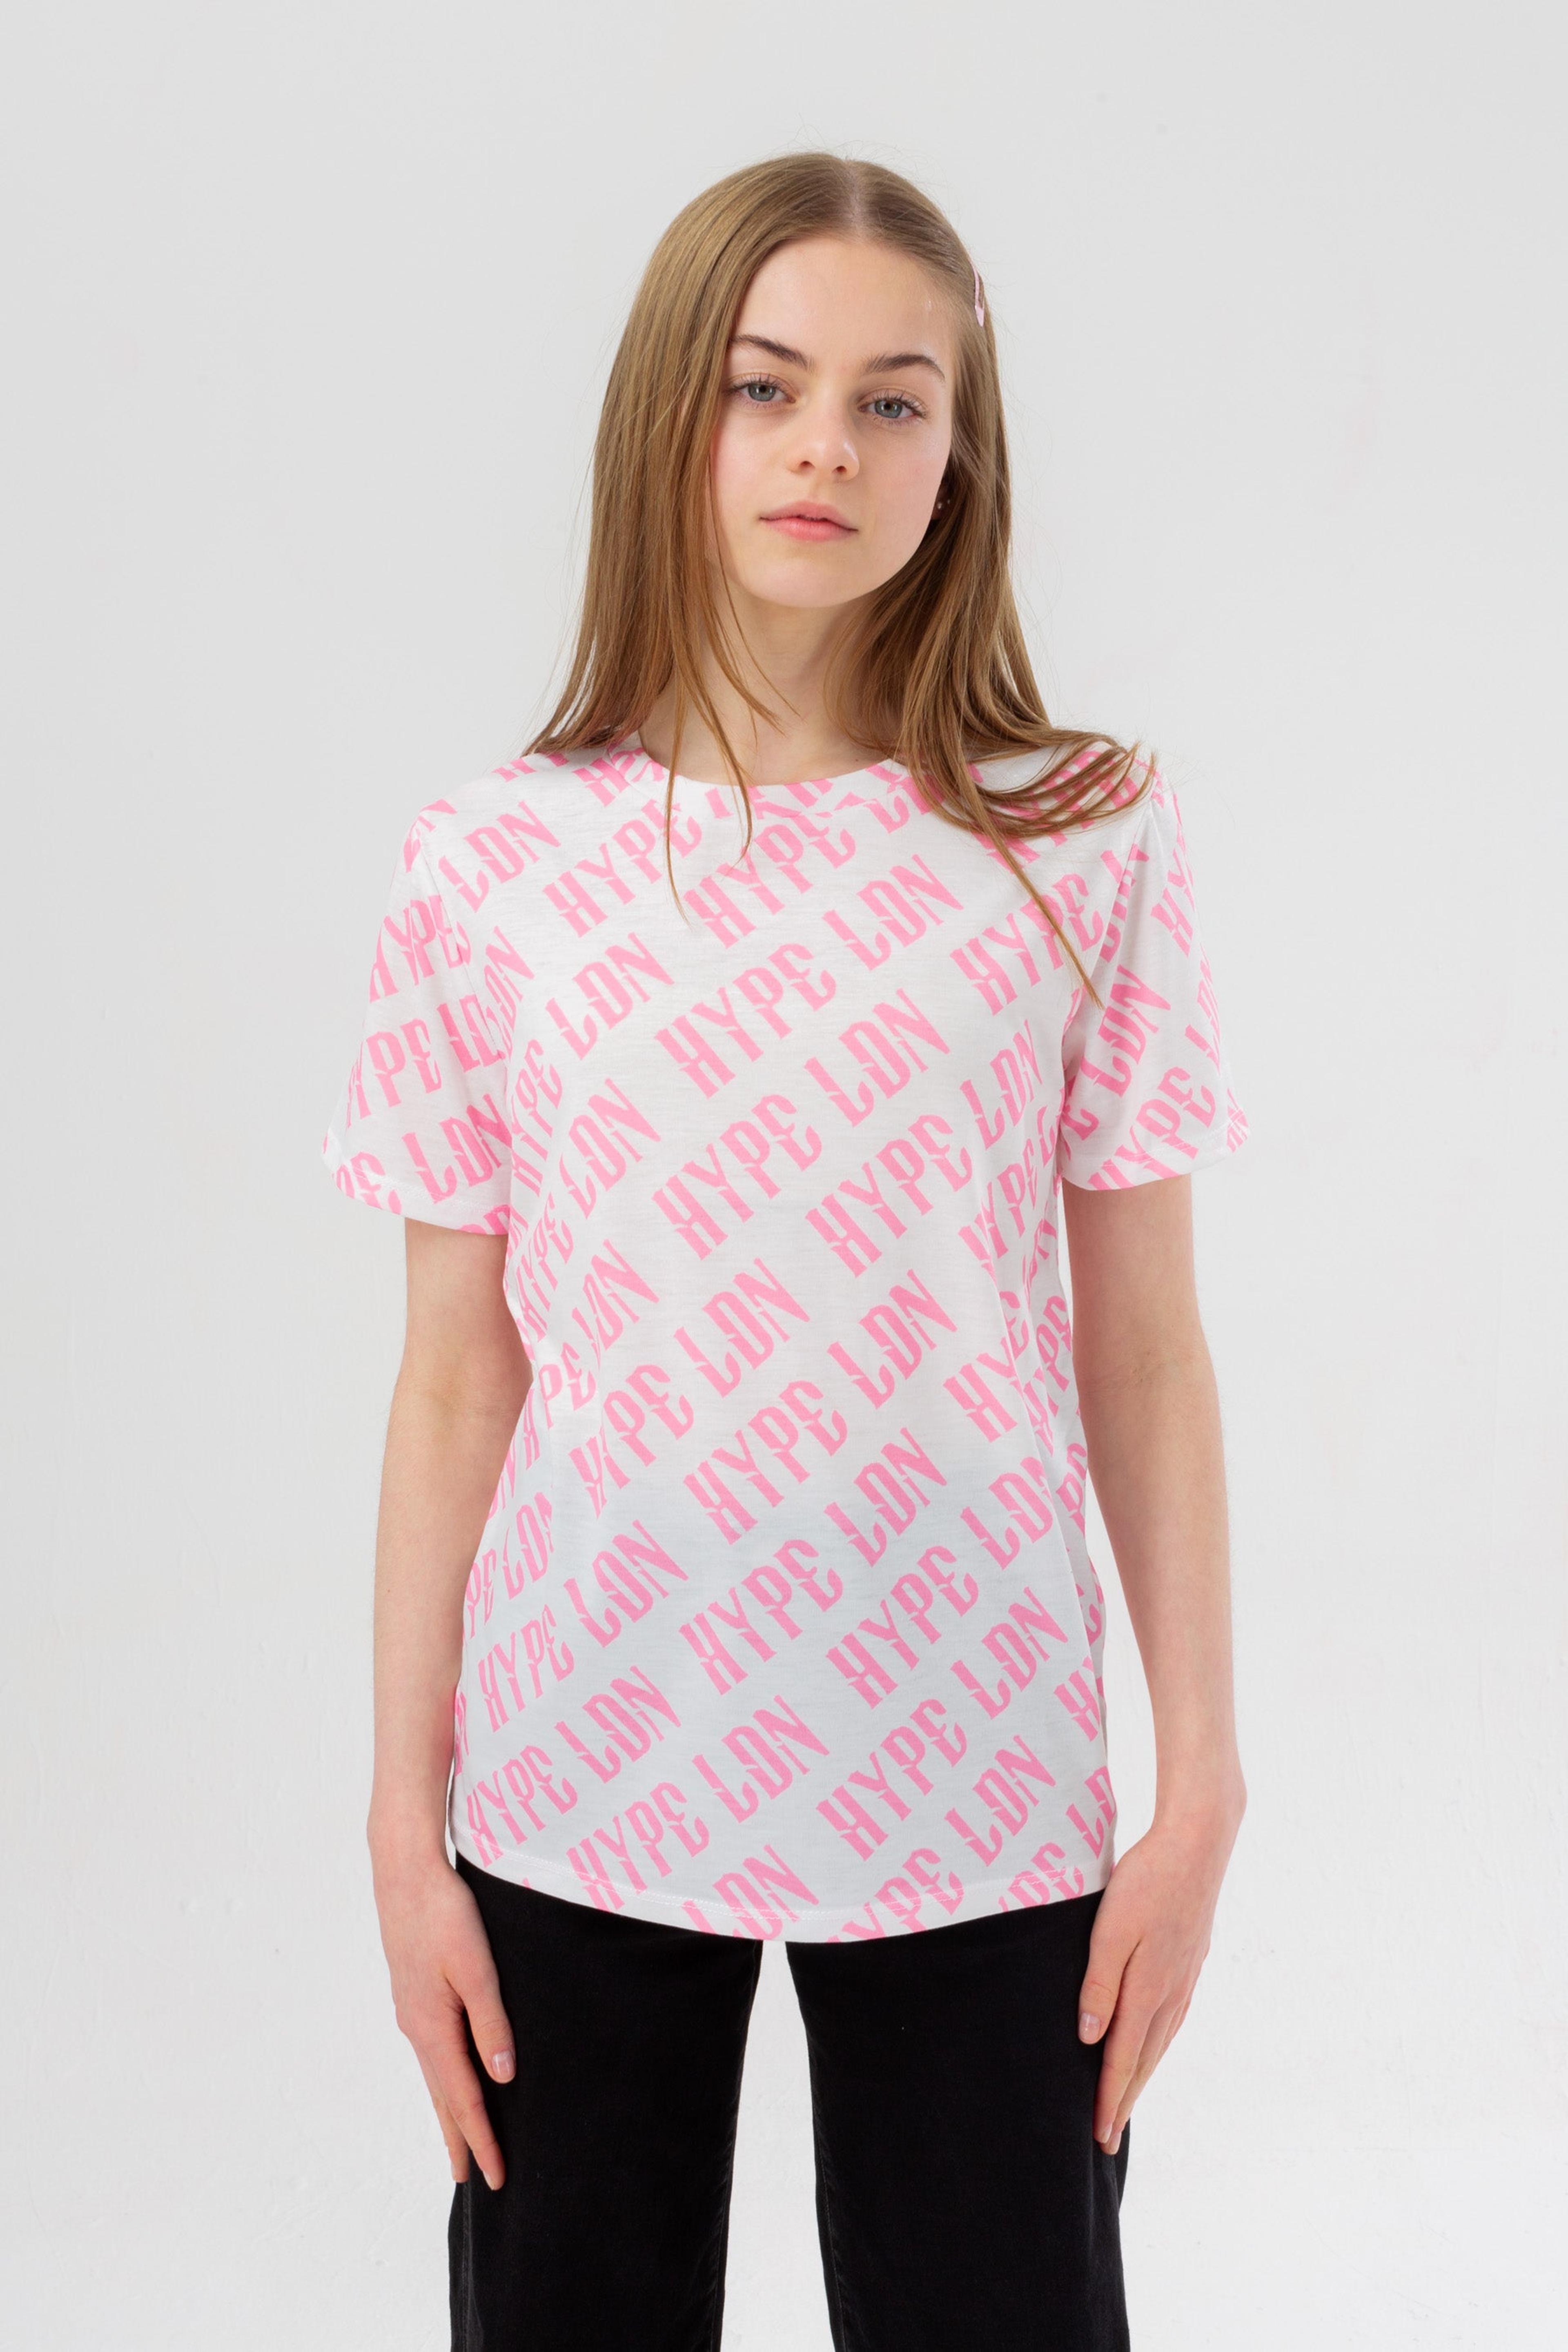 HYPE GIRLS PINK GOTHIC REPEAT T-SHIRT